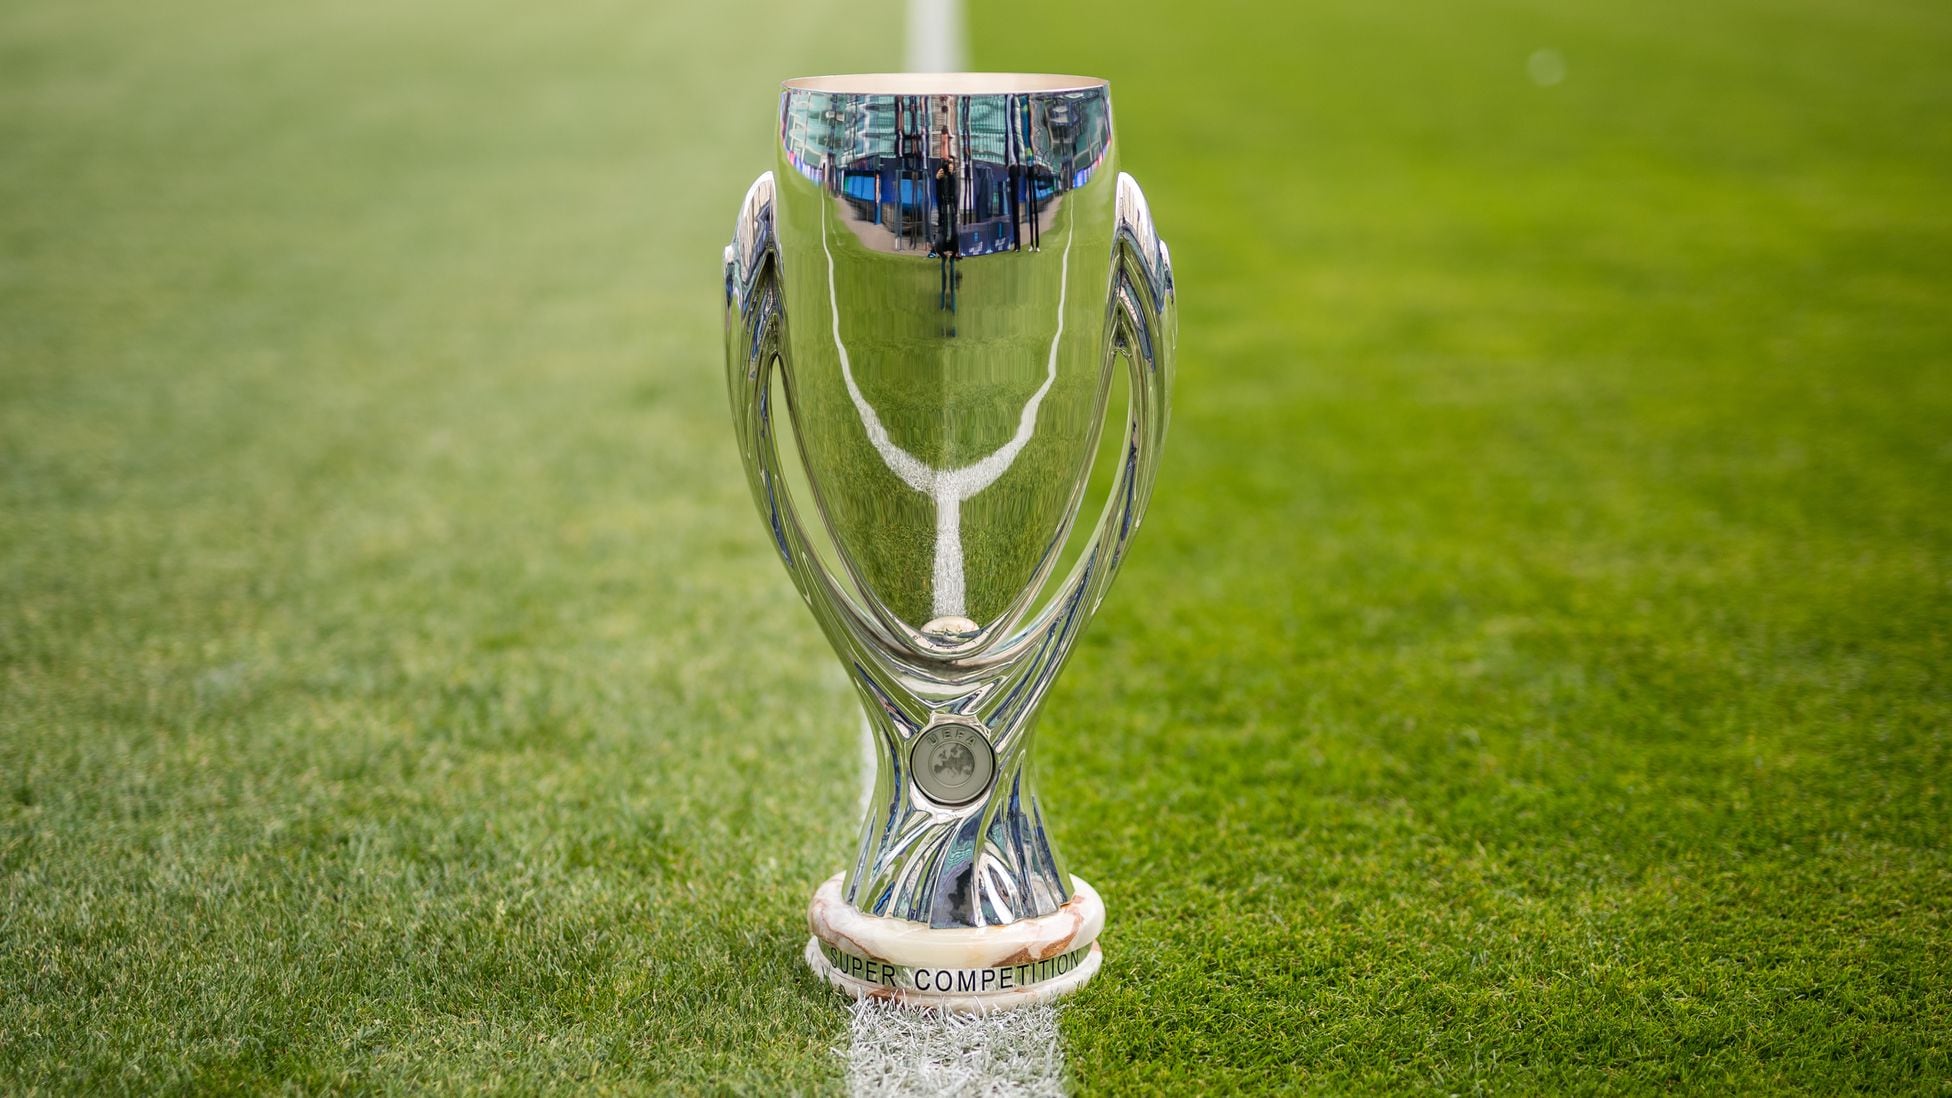 Real Madrid vs Eintracht Frankfurt: What is the UEFA Super Cup? Date, format, winners...